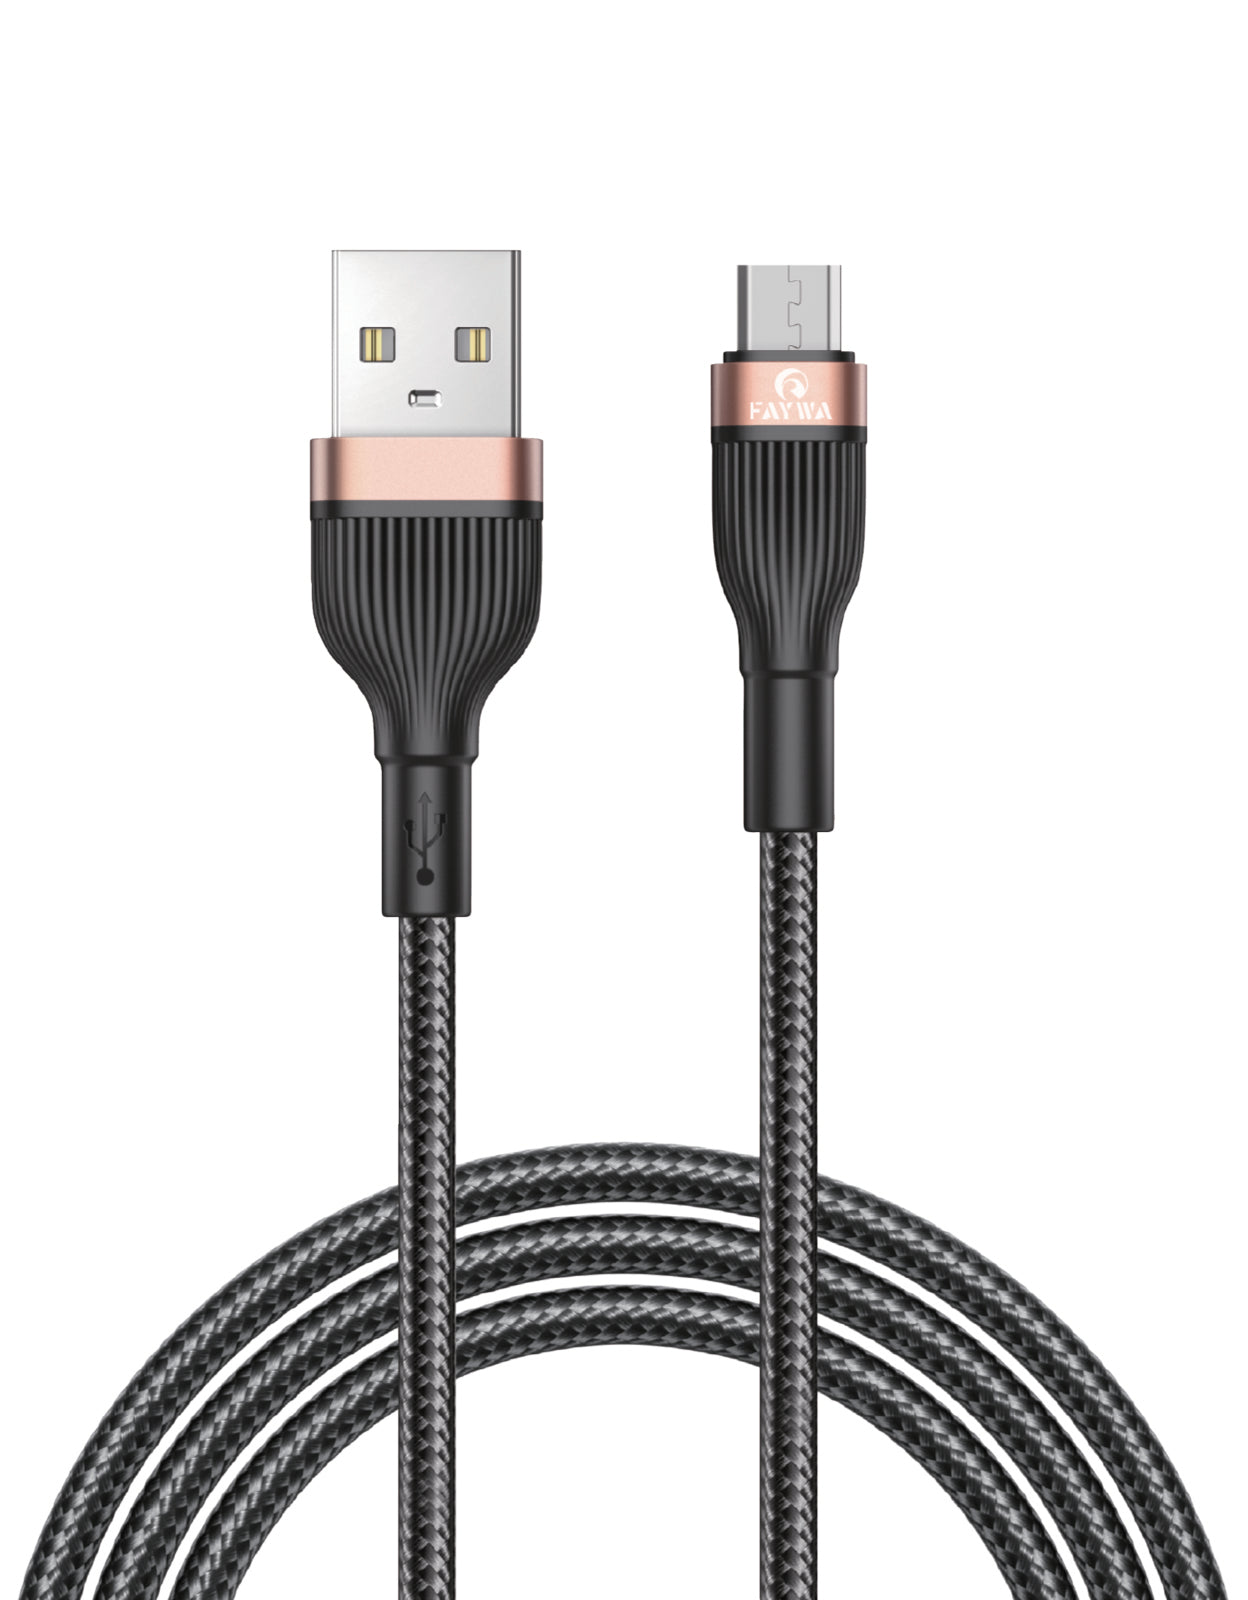 F Micro (Fast Charge Micro USB Cable - 3A) - My Store